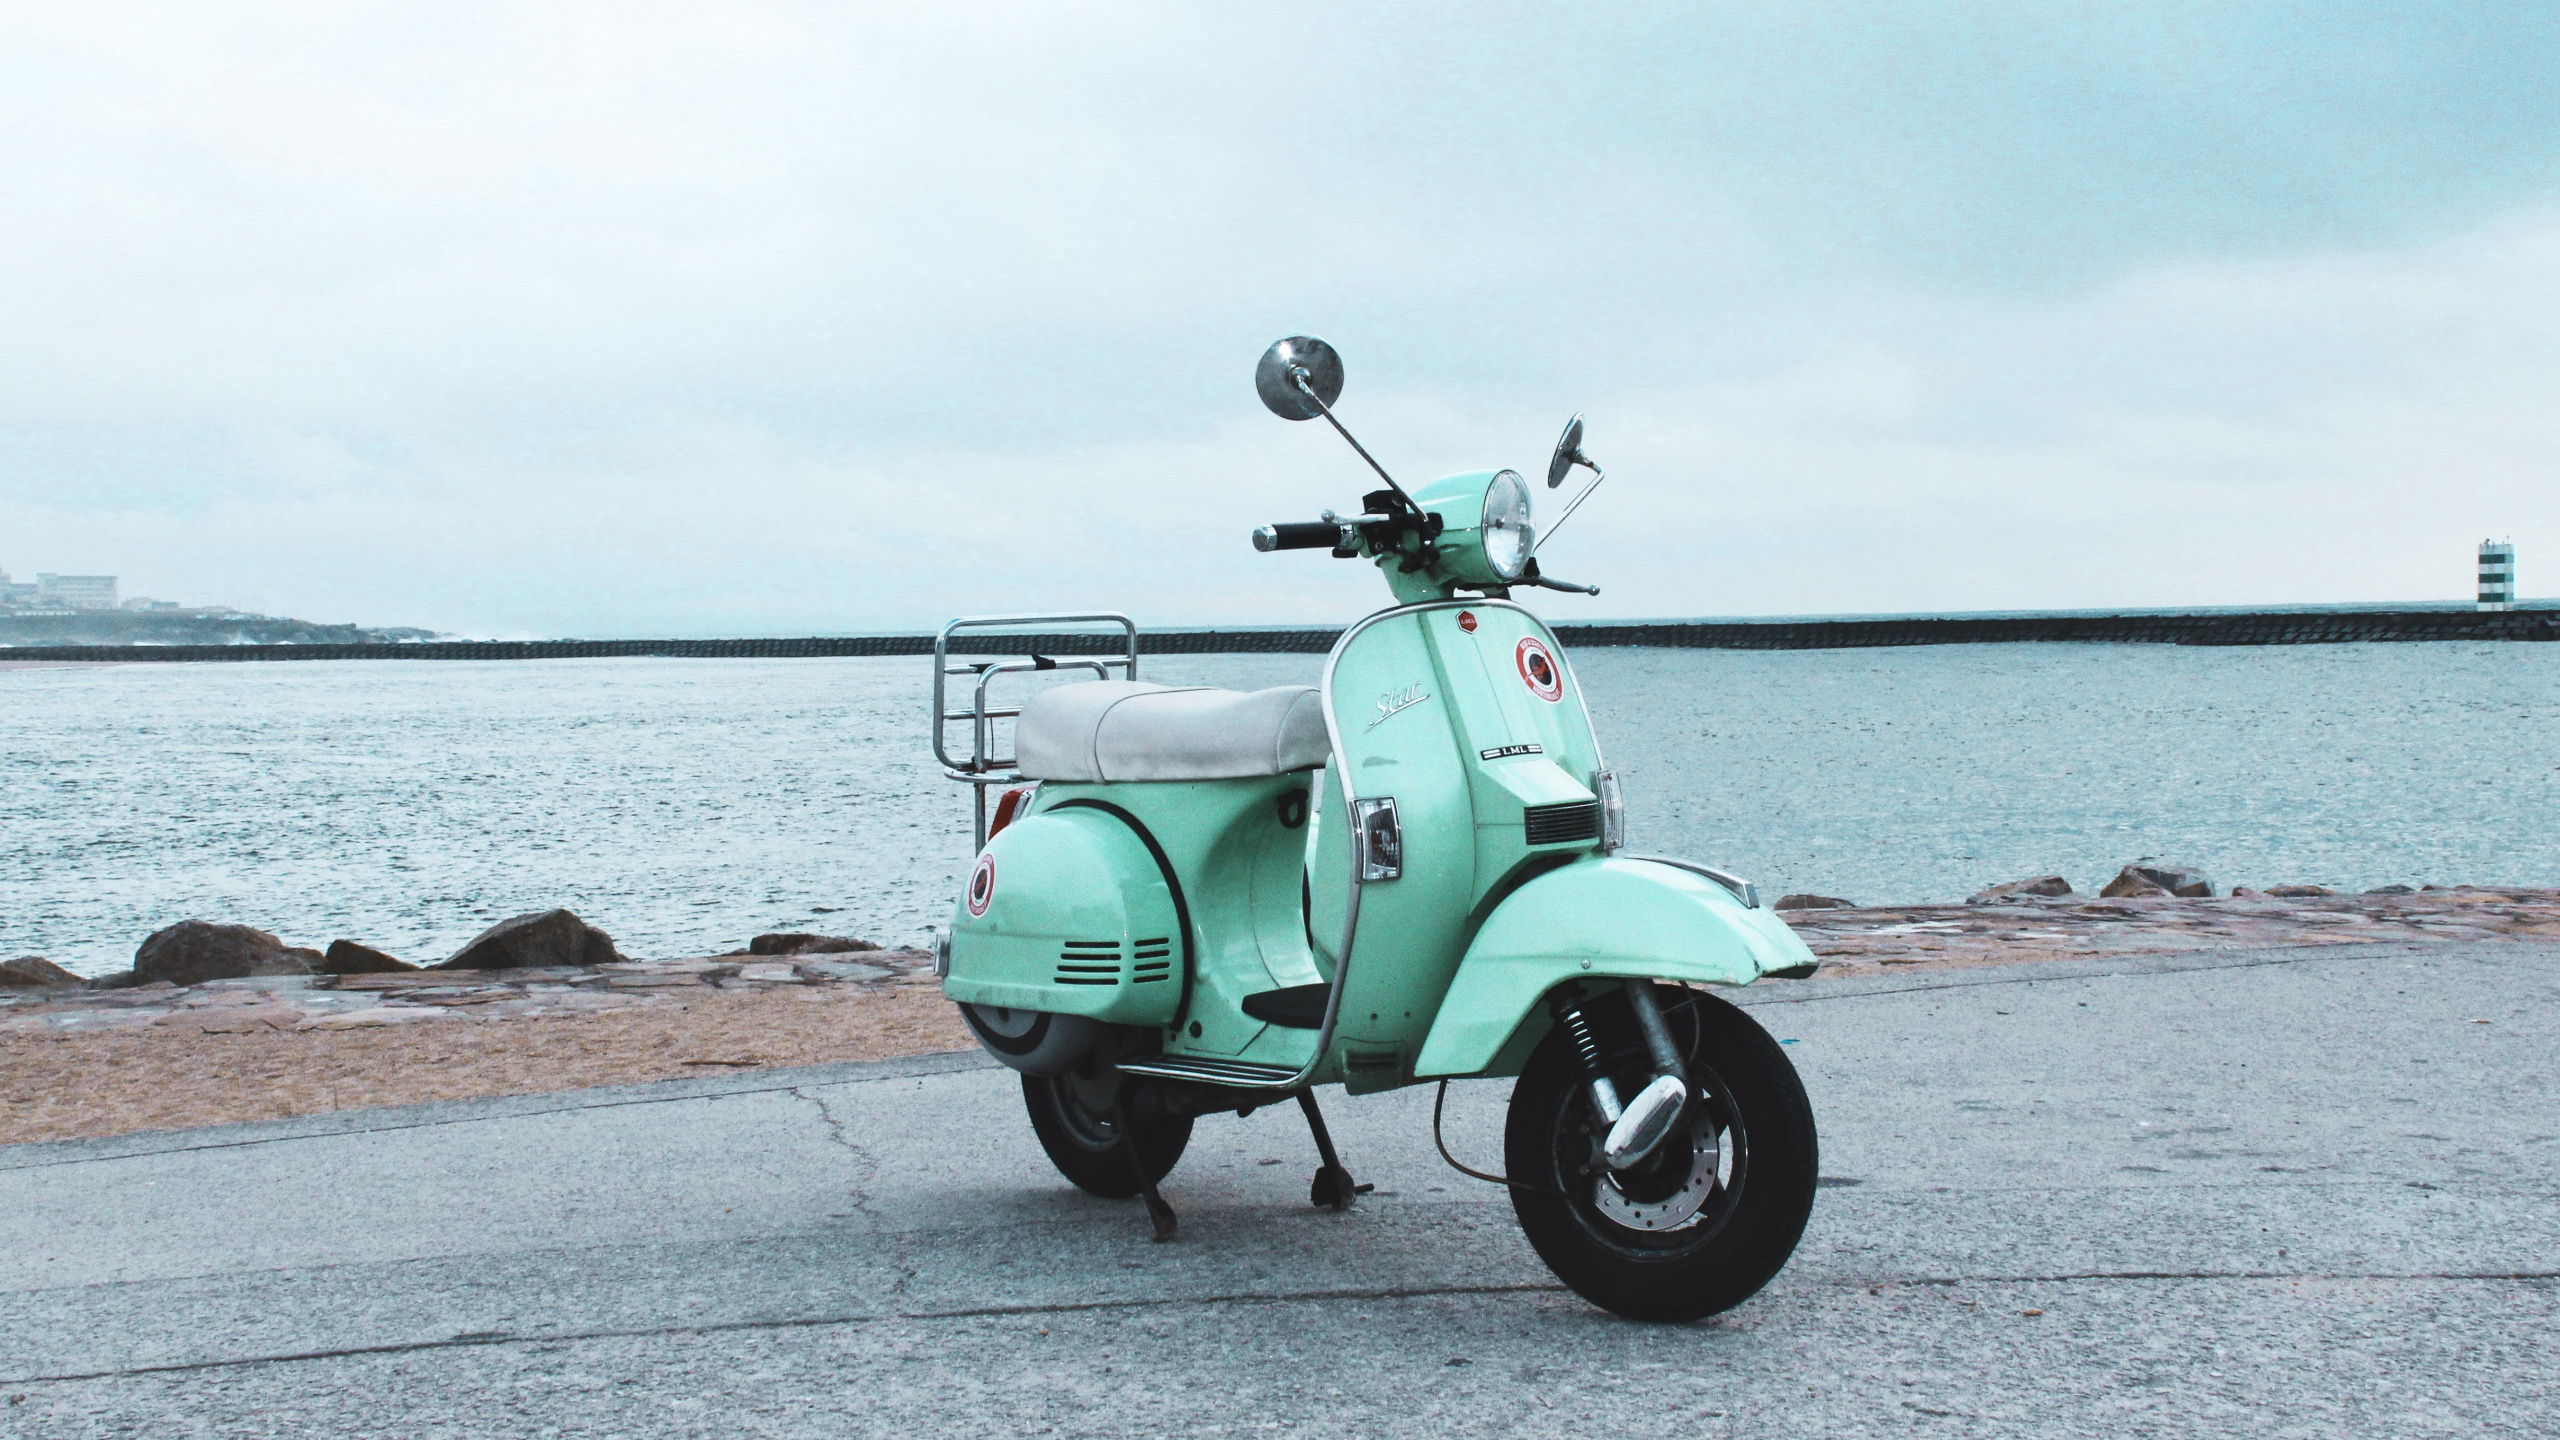 Green Motor Scooter Parked on Gray Concrete Pavement Near Body of Water During Daytime. Wallpaper in 2560x1440 Resolution